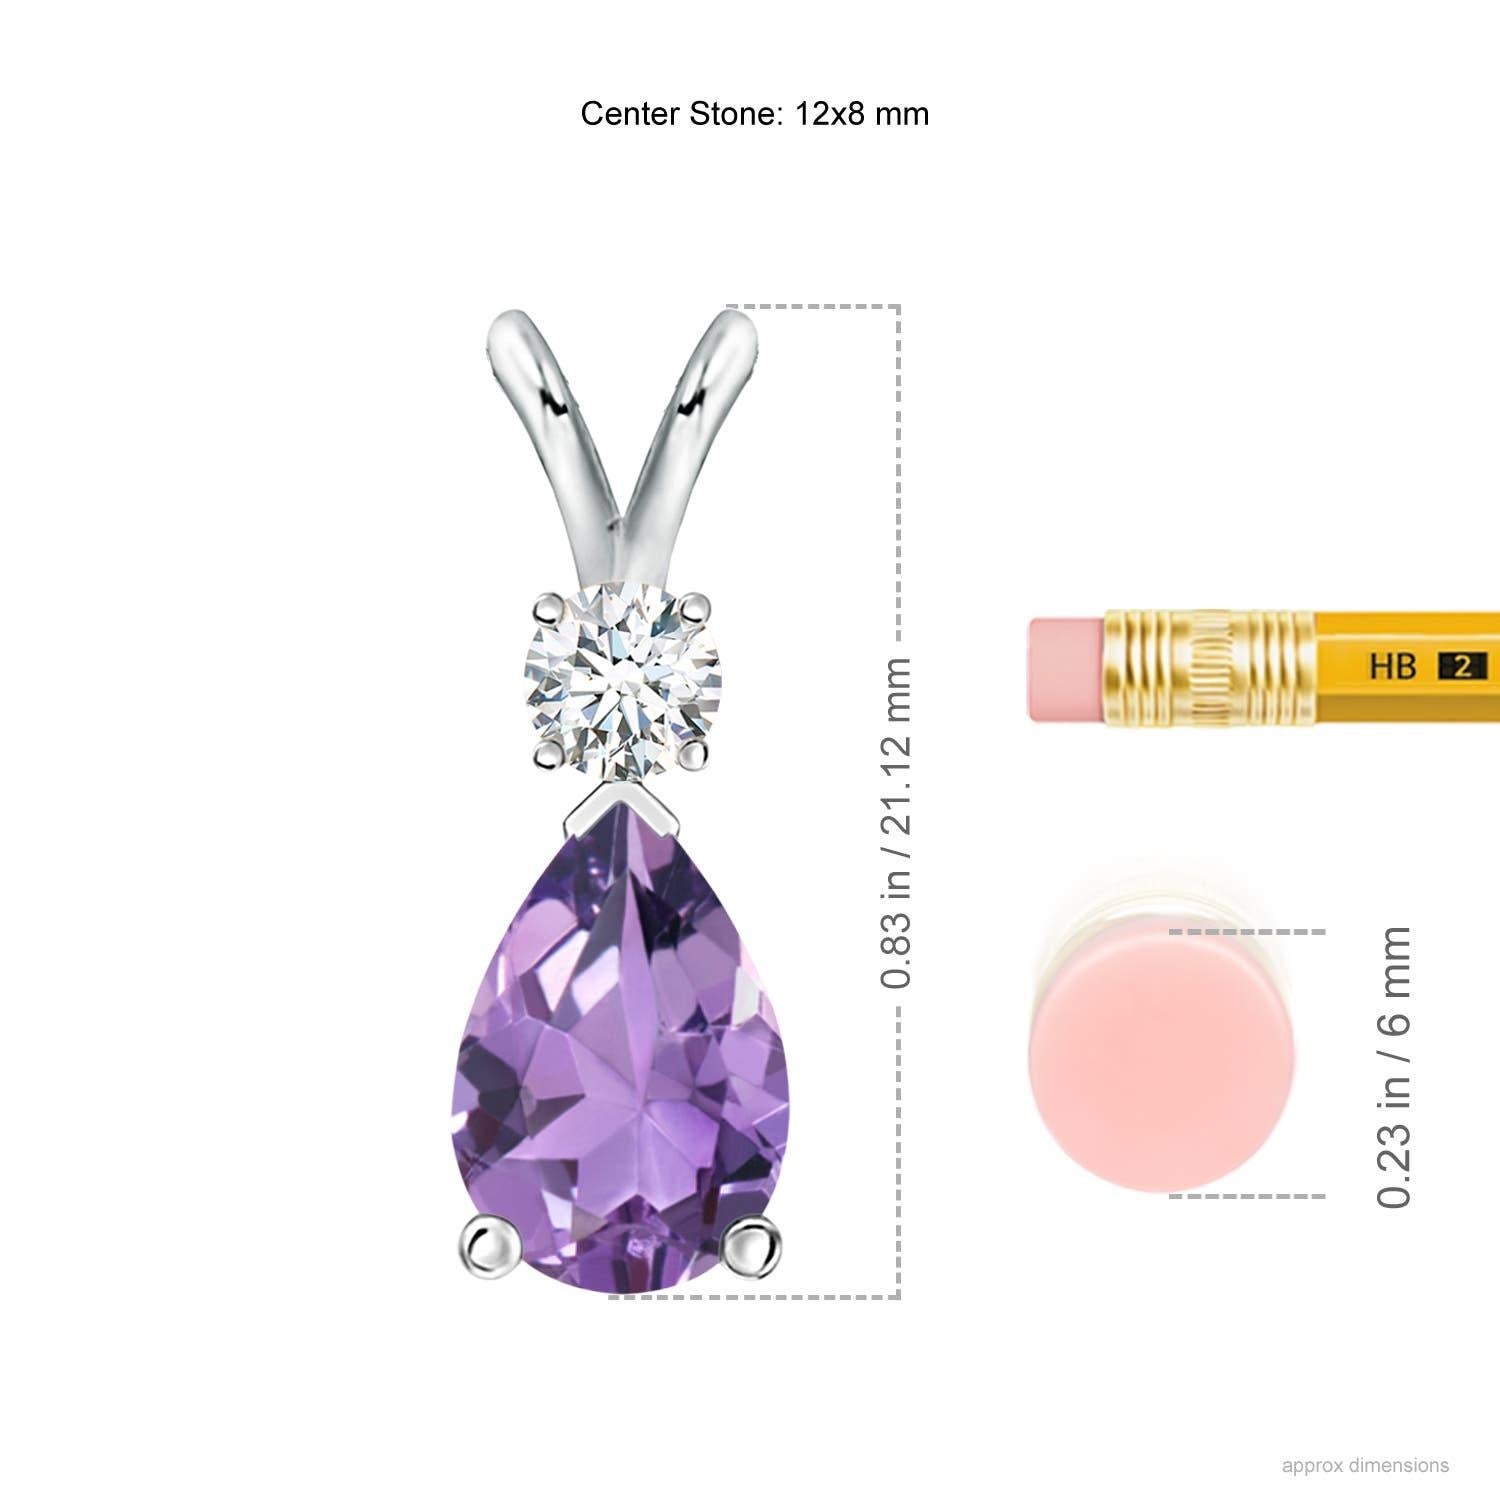 A pear-shaped deep purple amethyst is secured in a prong setting and embellished with a diamond accent on the top. Simple yet stunning, this teardrop amethyst pendant with V bale is sculpted in platinum.